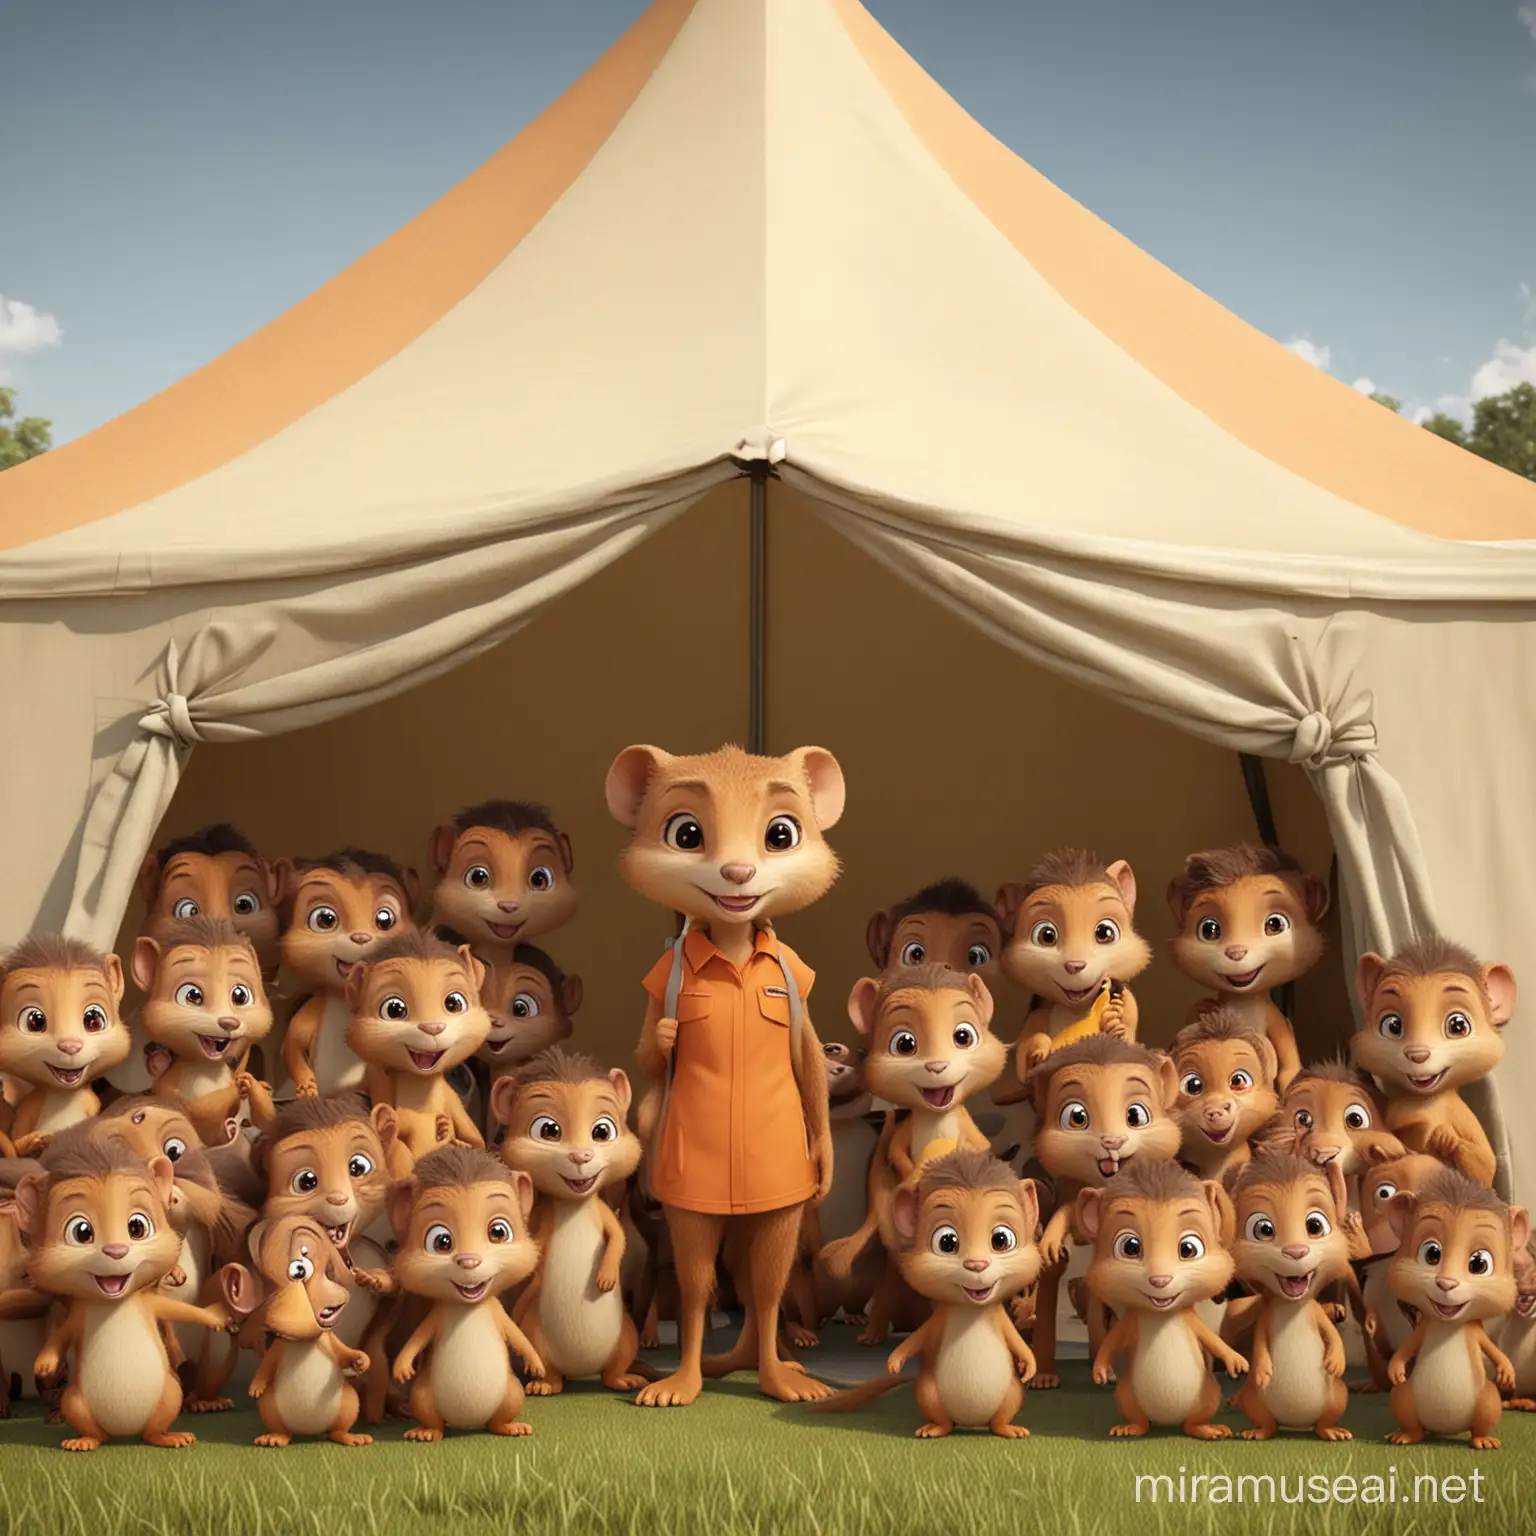 cute female cartoon mongoose with lots of cartoon human toddlers in a marquee style tent 

